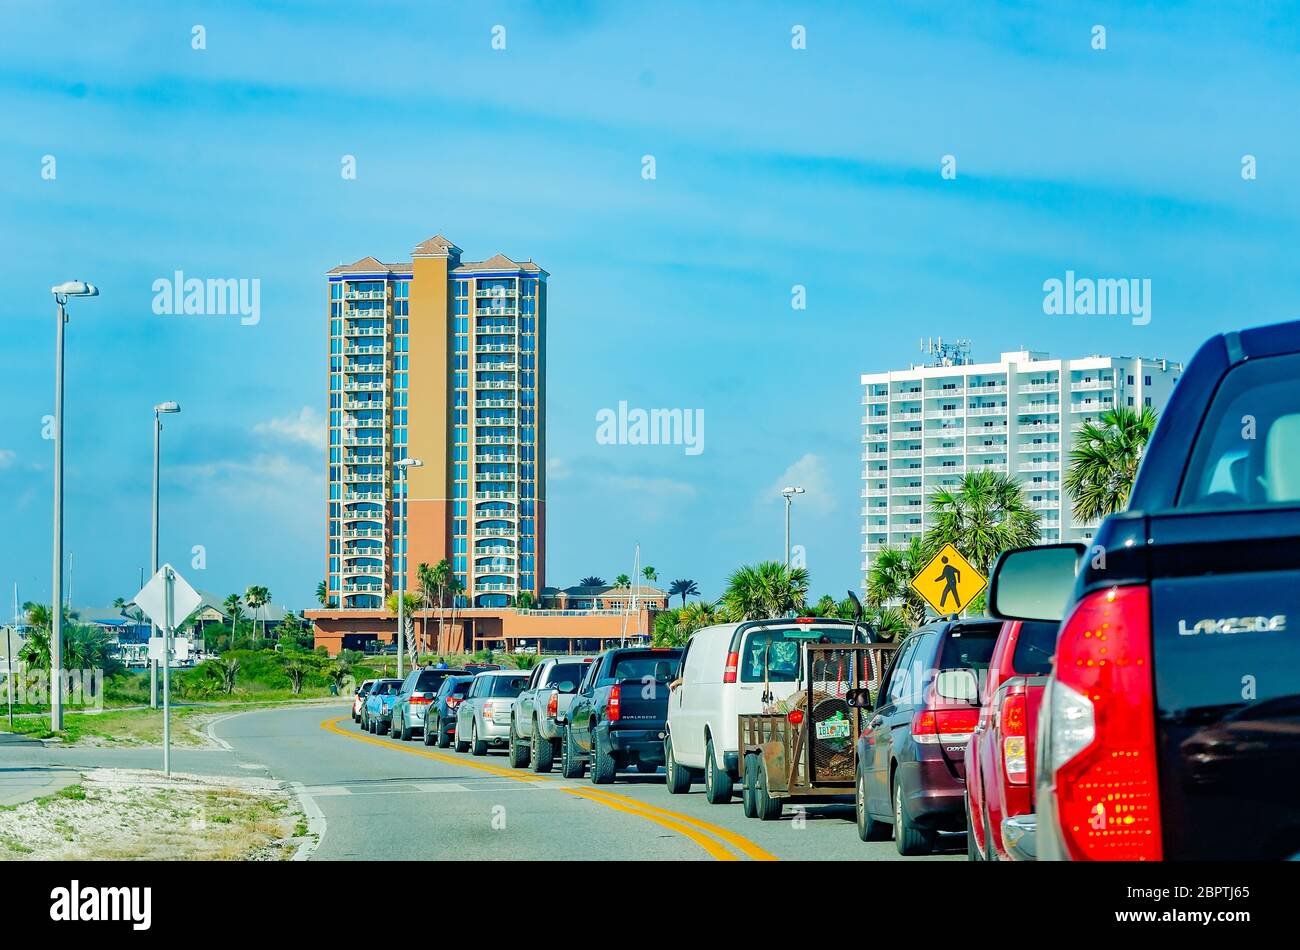 Traffic enters Pensacola Beach, May 16, 2020, in Gulf Breeze, Florida. The beach recently reopened after being closed for the COVID-19 pandemic. Stock Photo